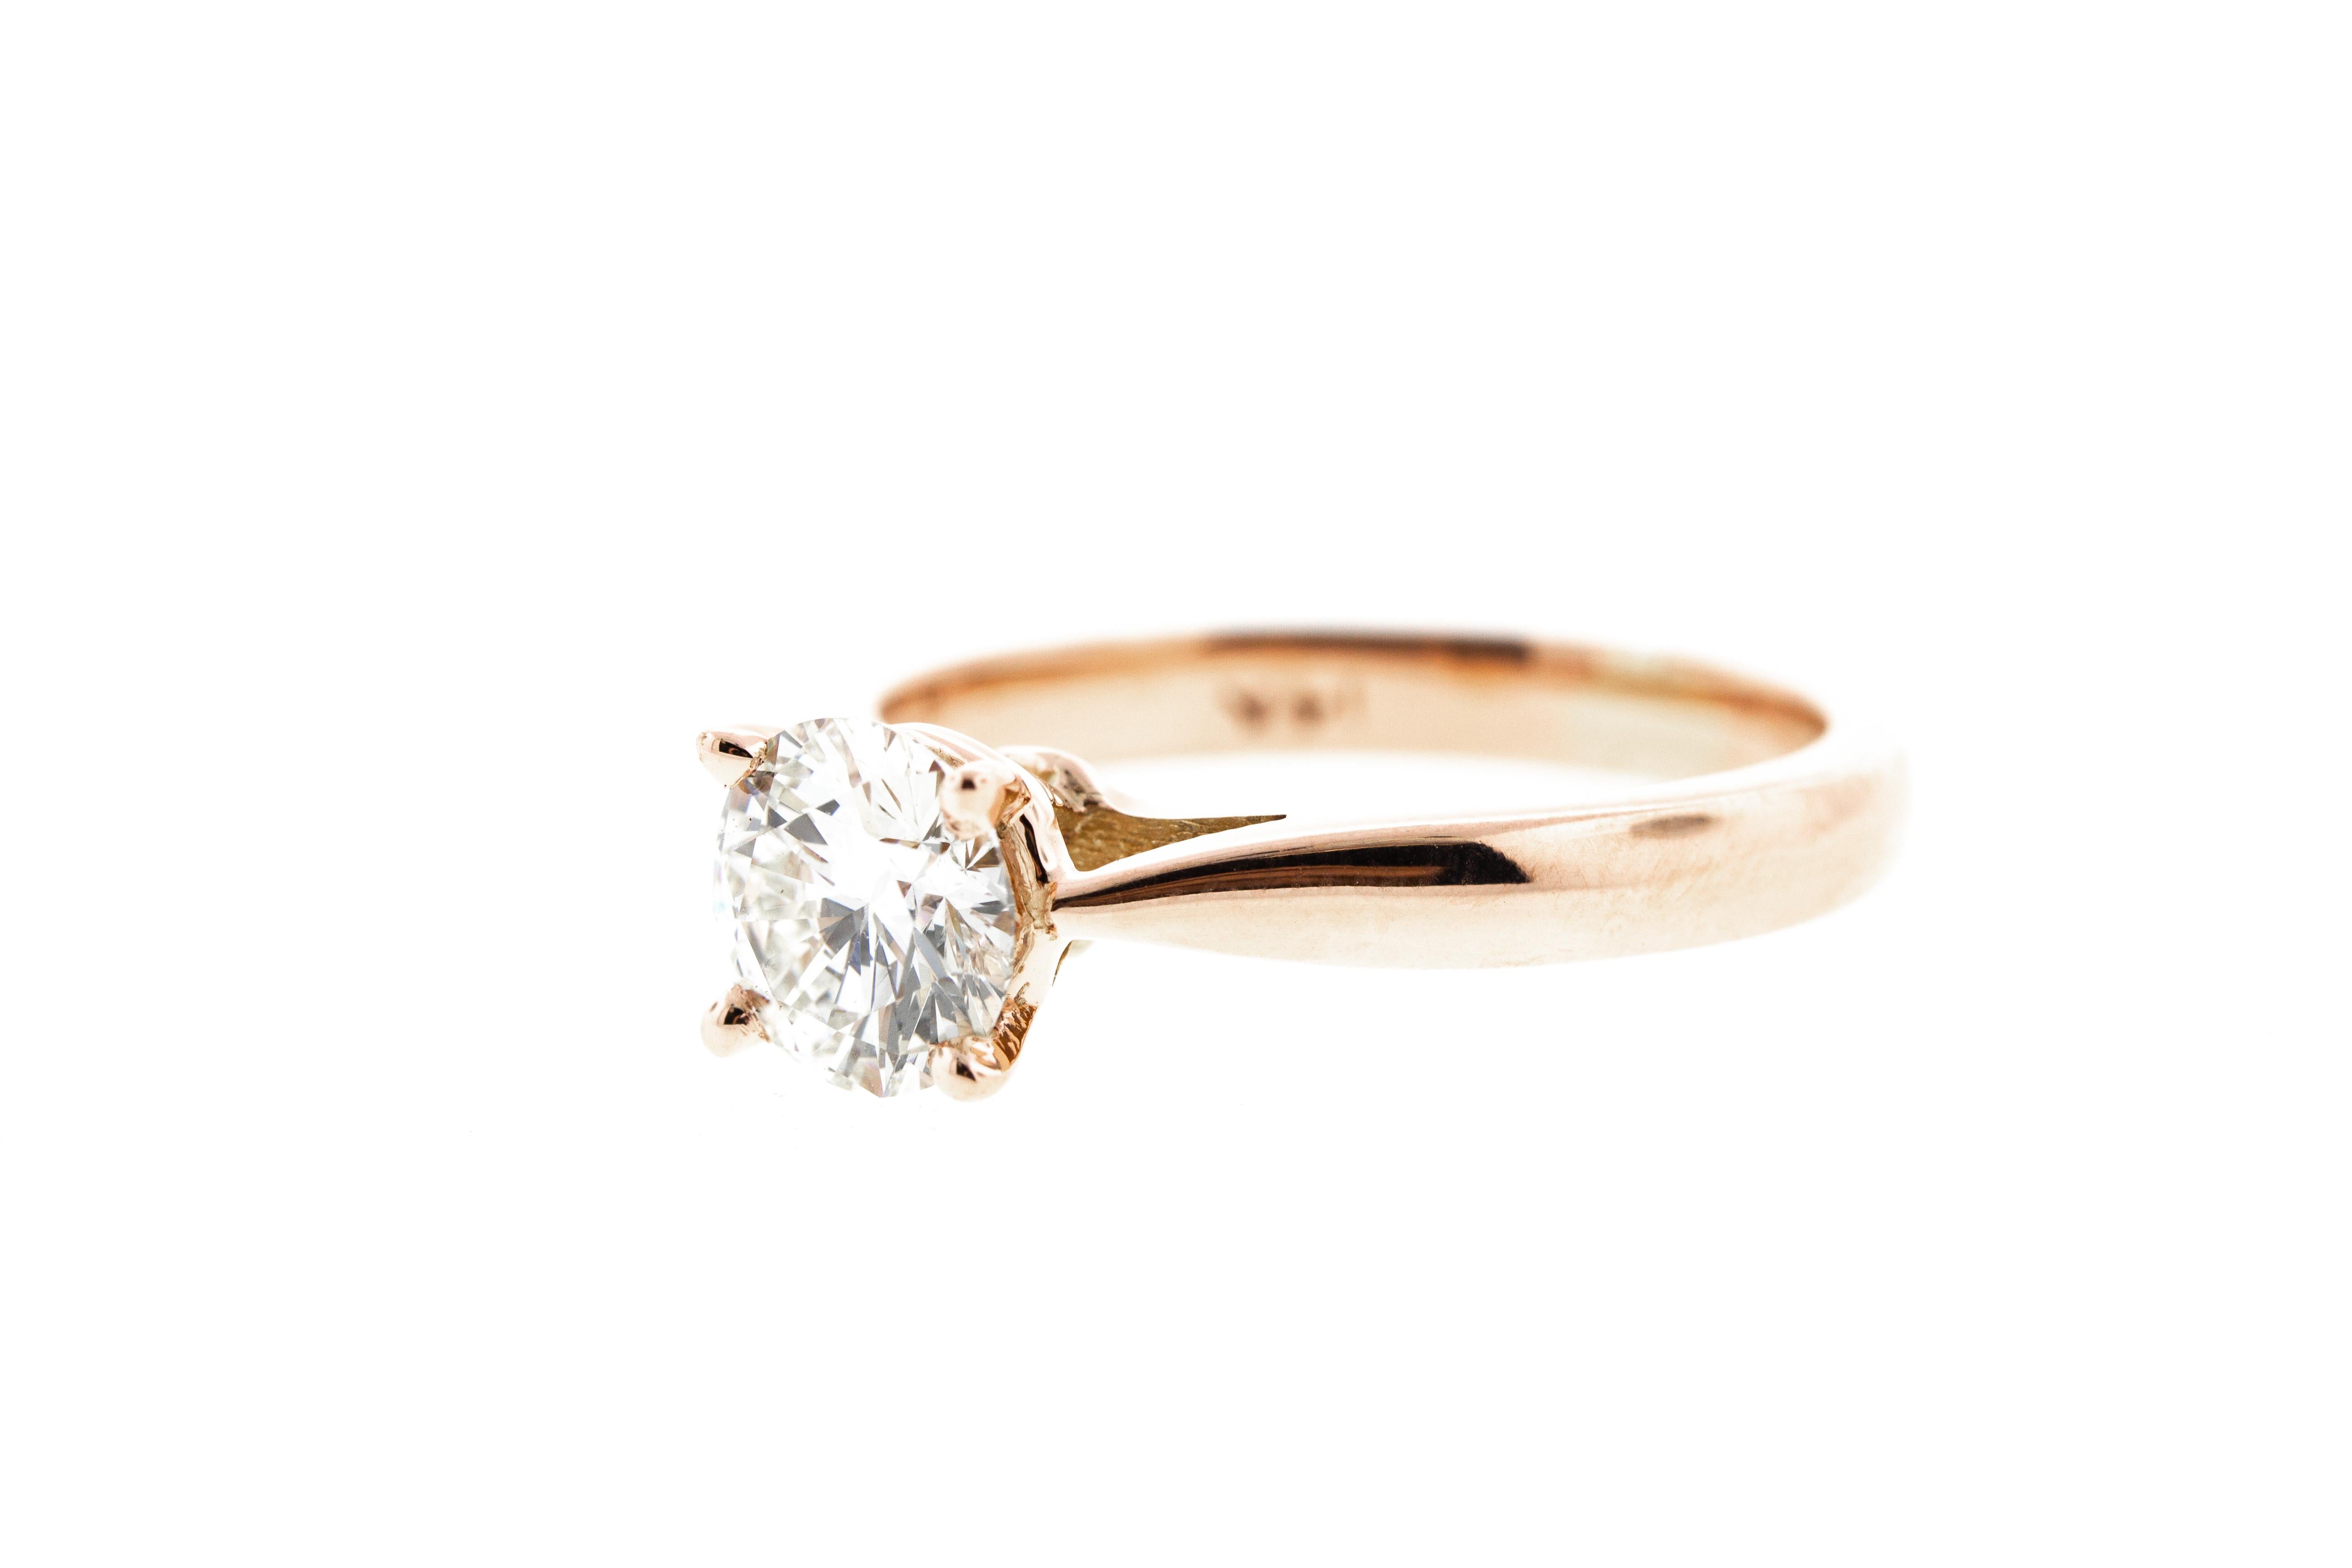 This rose gold diamond engagement ring features a custom built-in setting with a tapered shank. This ring can be made in any color gold for any shape of diamond and features a round GIA certified diamond.